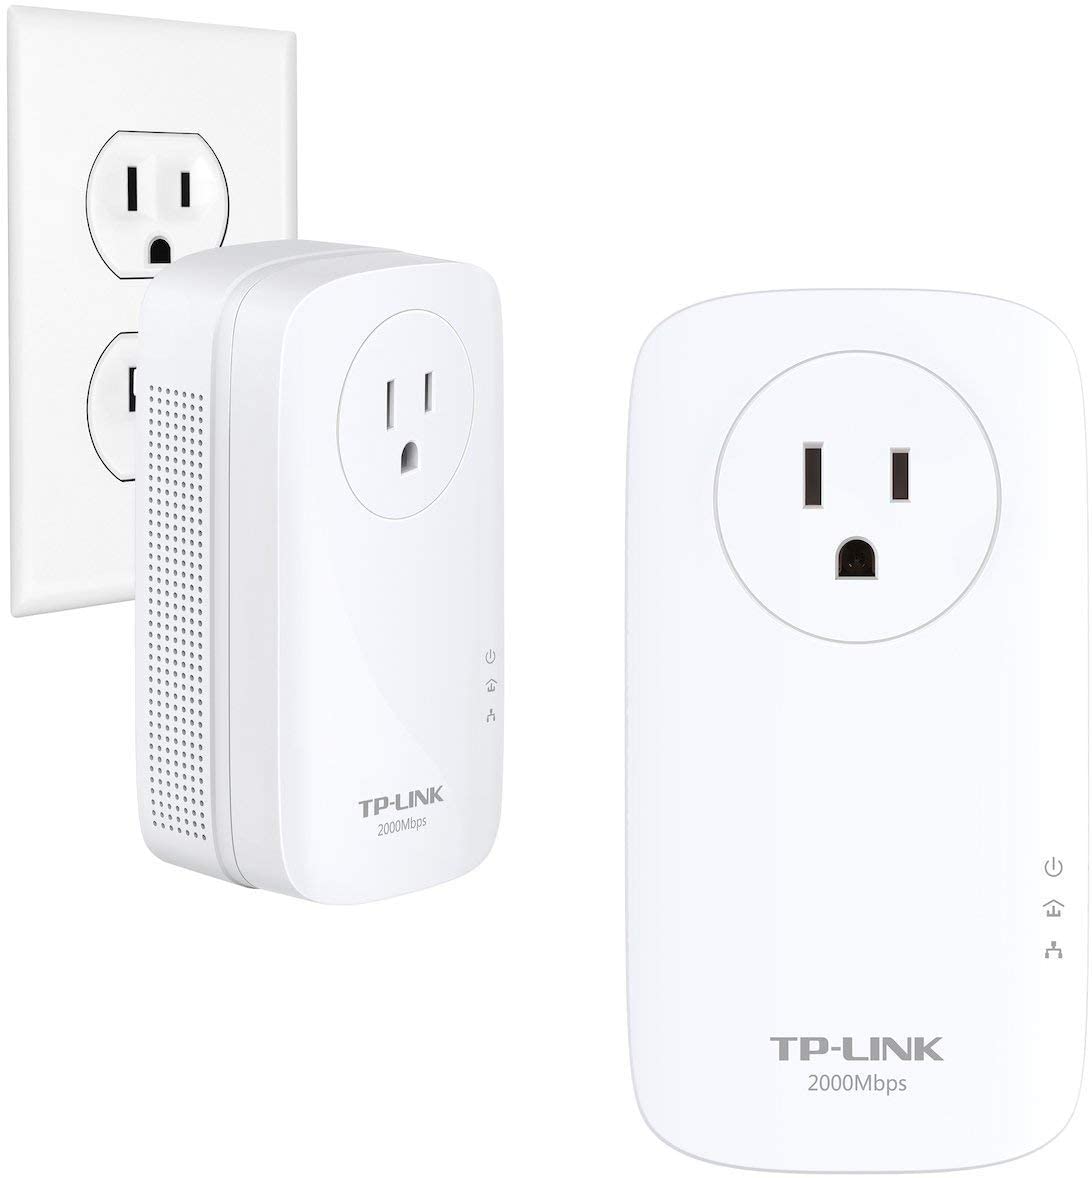 TP-Link AV2000 Powerline Adapter (TL-PA9020P KIT) - 2 Gigabit Ports, Ethernet Over Power, Plug&Play, Power Saving, 2x2 MIMO, Noise Filtering, Extra...